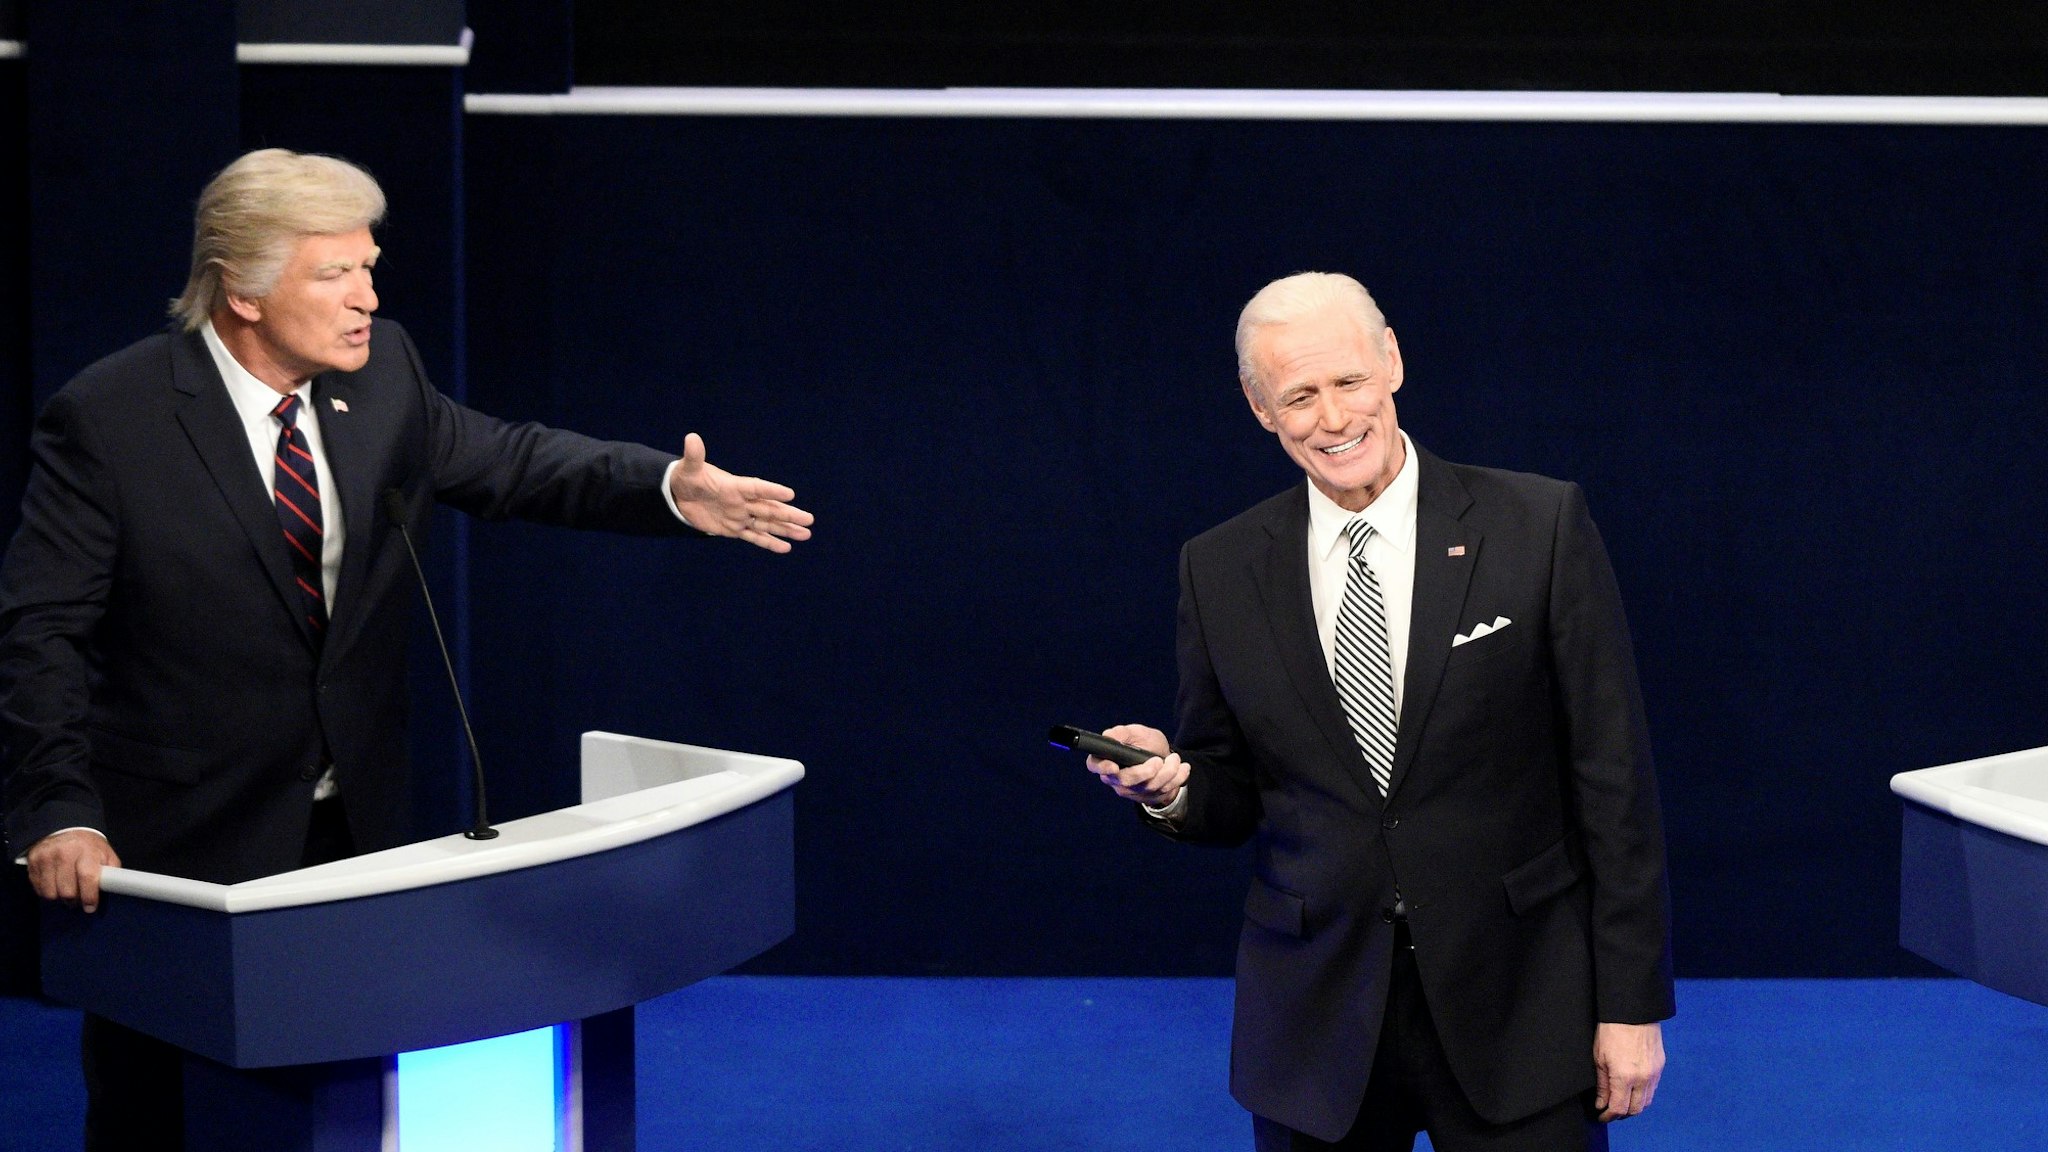 SATURDAY NIGHT LIVE -- "Chris Rock" Episode 1786 -- Pictured: (l-r) Alec Baldwin as Donald Trump and Jim Carrey as Joe Biden during the "First Debate" Cold Open on Saturday, October 3, 2020 -- (Photo by: